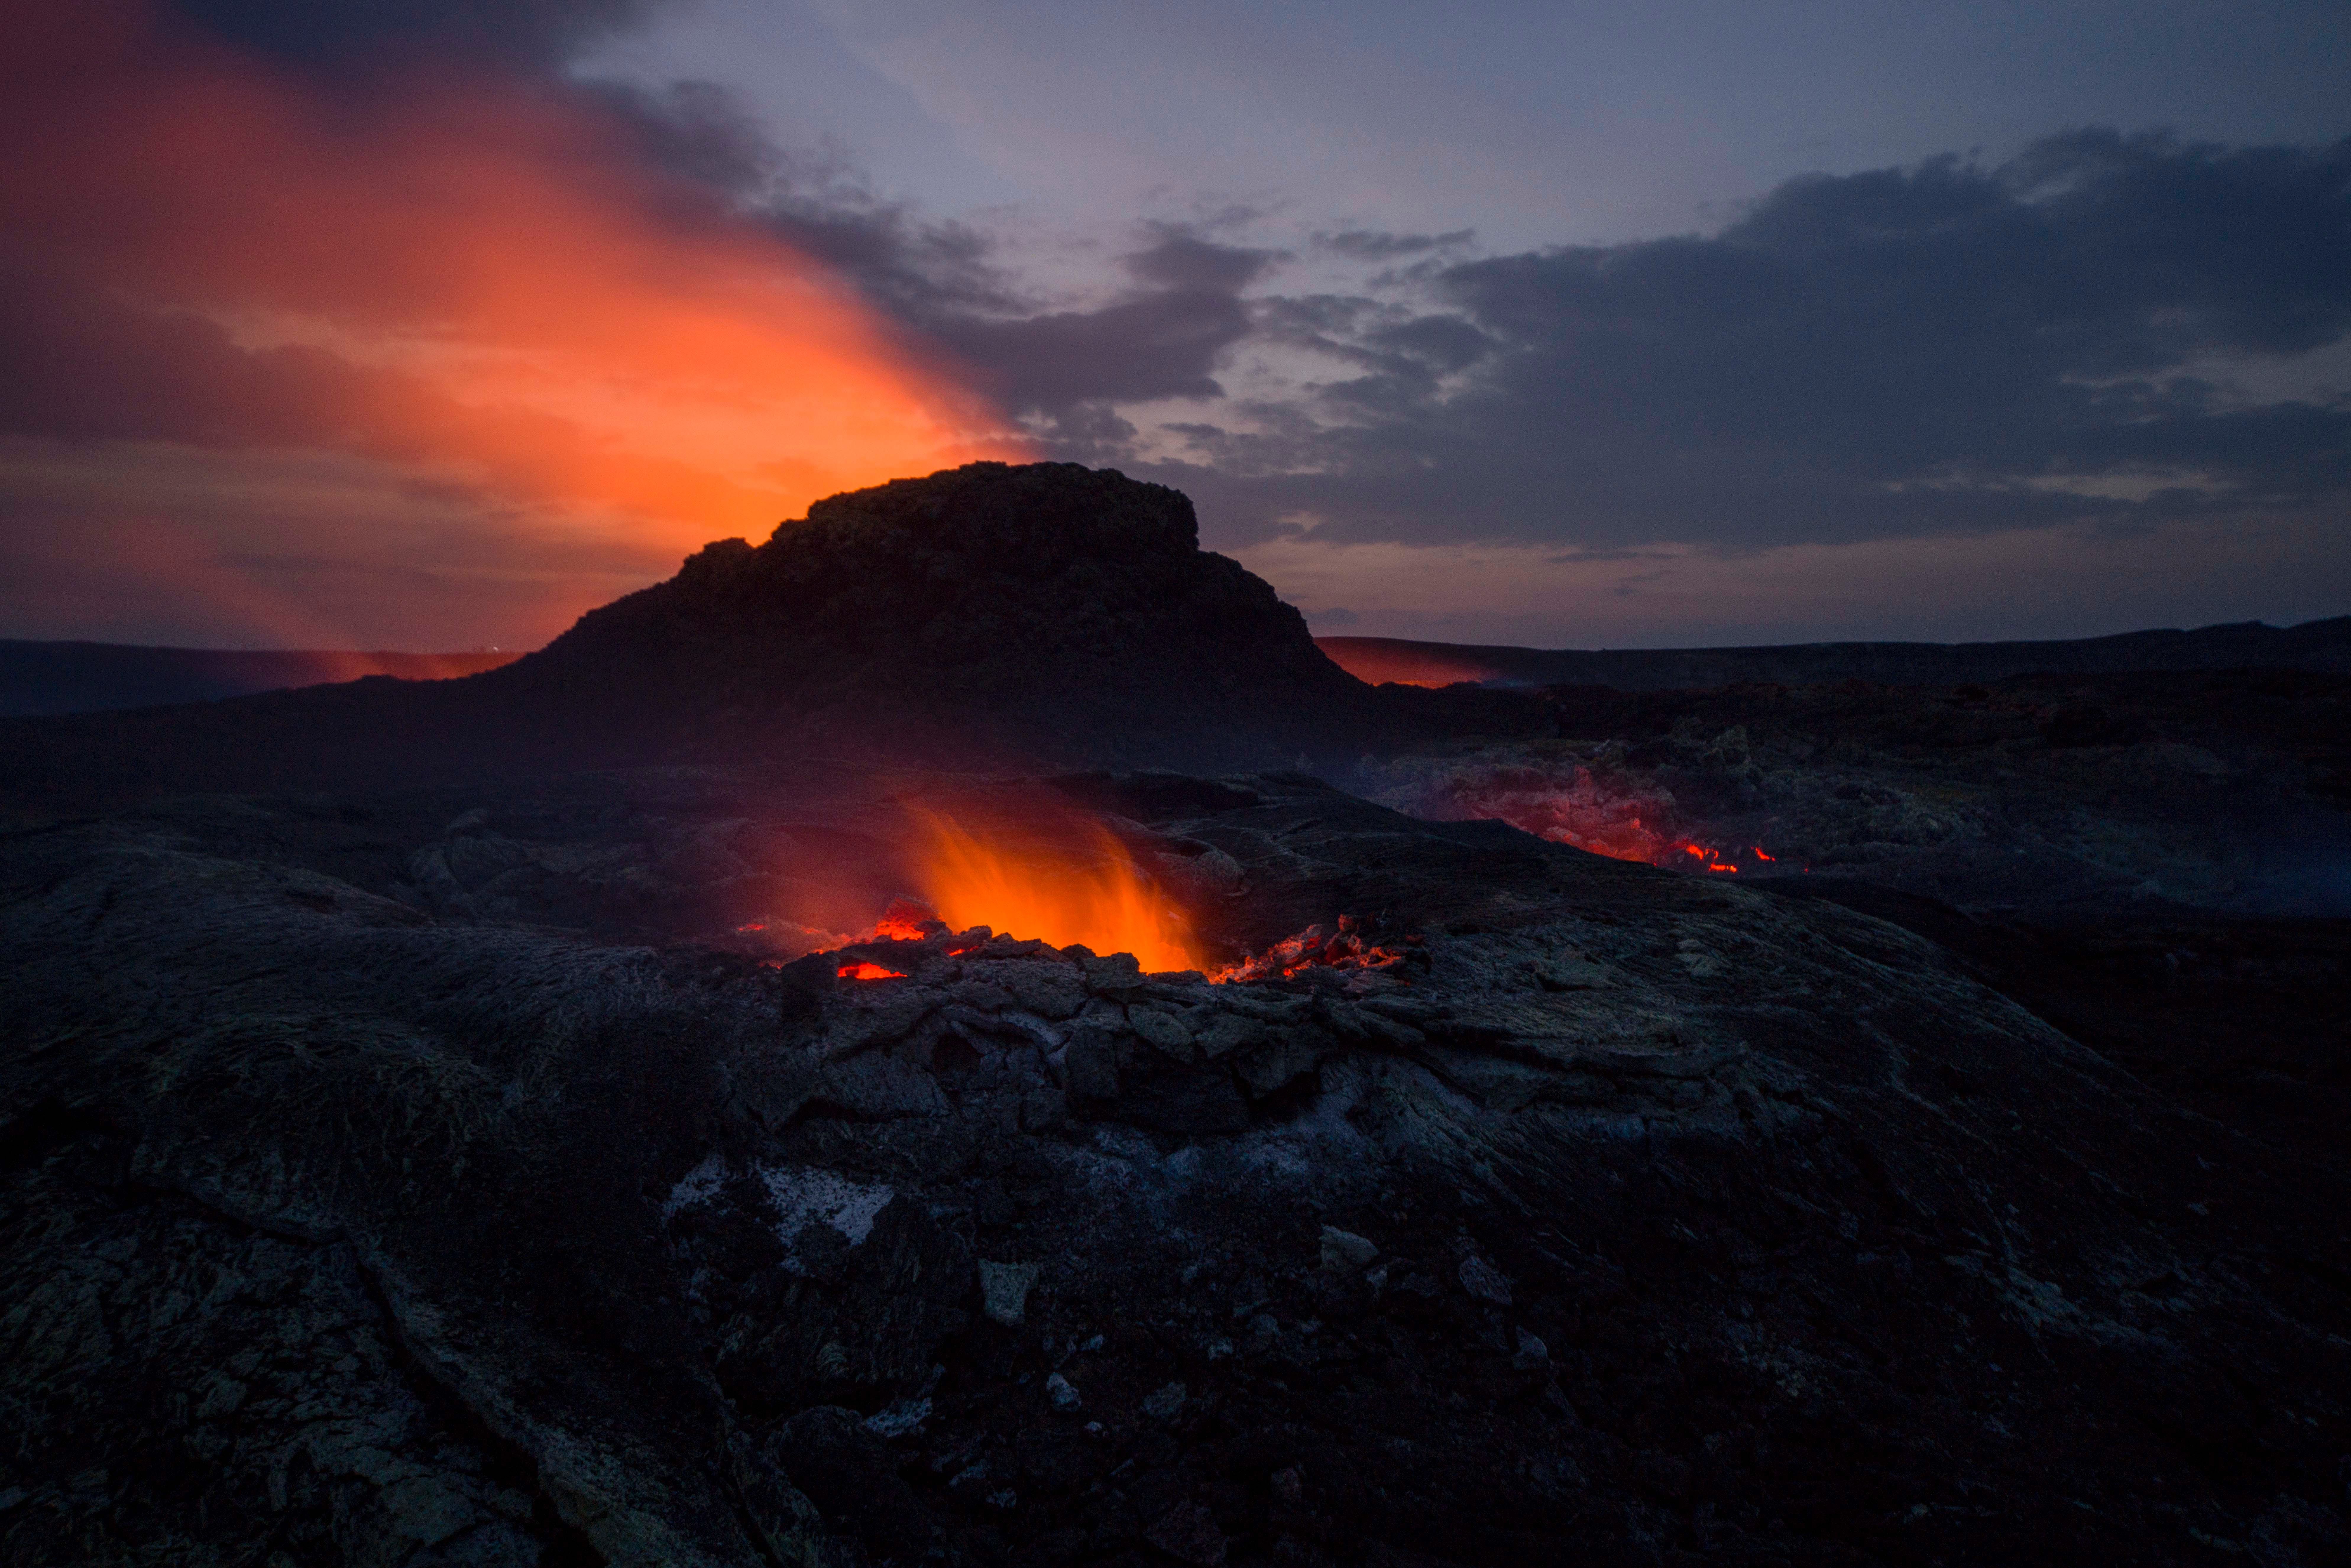 Volcano Picture. Download Free Image